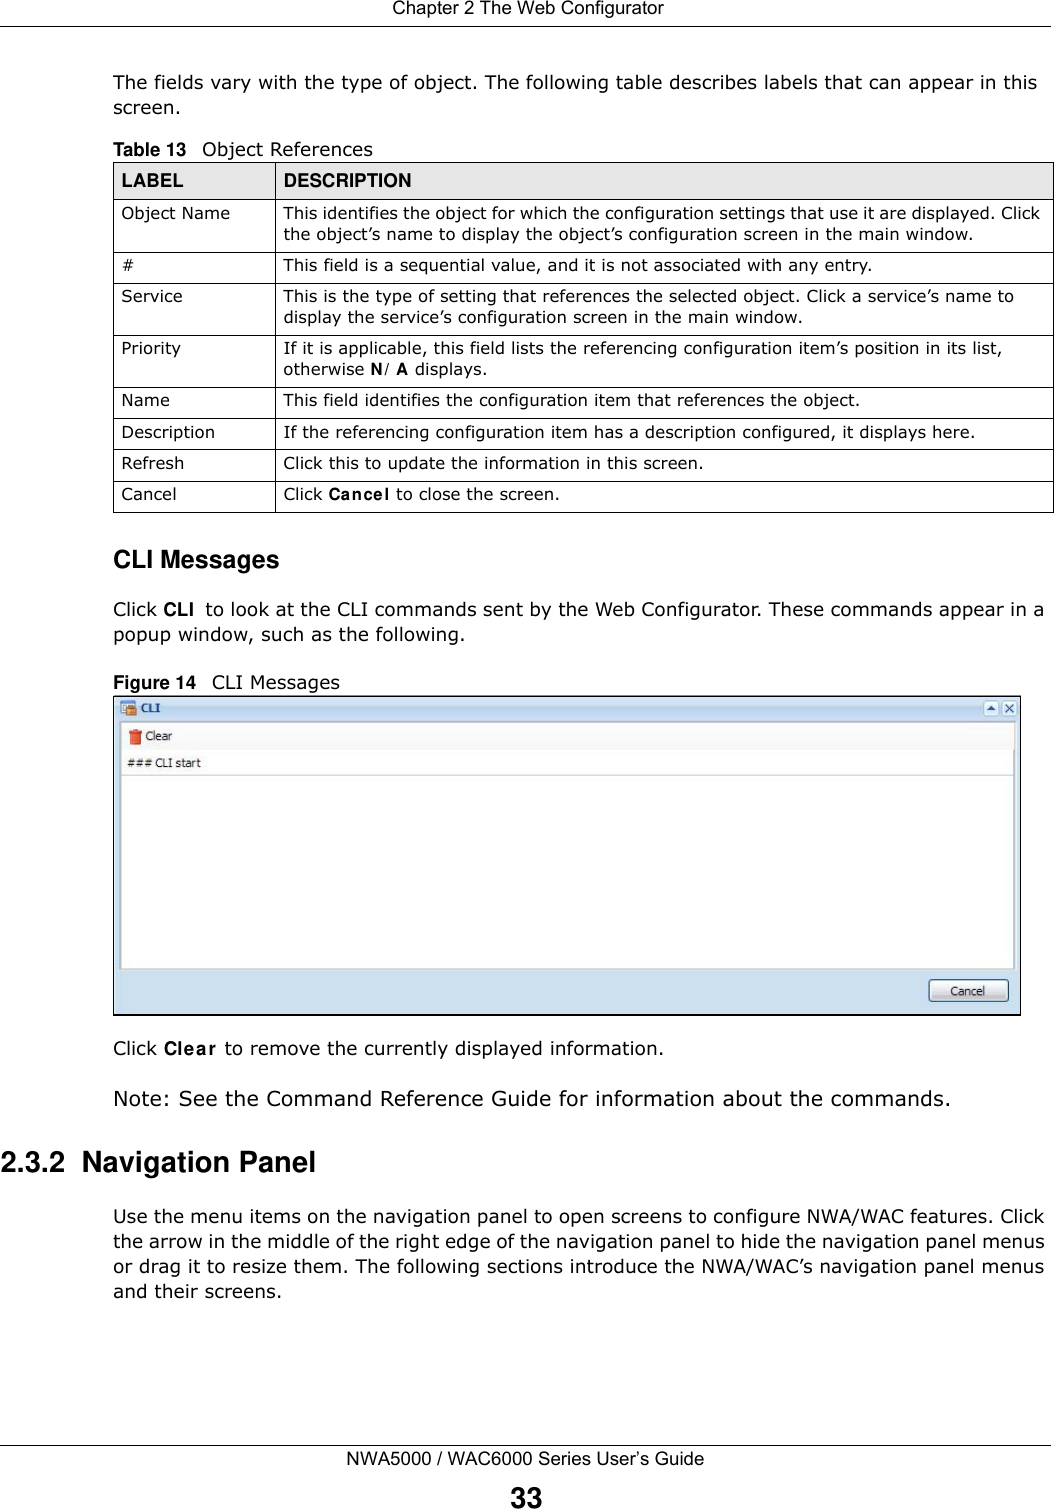  Chapter 2 The Web ConfiguratorNWA5000 / WAC6000 Series User’s Guide33The fields vary with the type of object. The following table describes labels that can appear in this screen.CLI MessagesClick CLI  to look at the CLI commands sent by the Web Configurator. These commands appear in a popup window, such as the following.Figure 14   CLI MessagesClick Clea r to remove the currently displayed information.Note: See the Command Reference Guide for information about the commands.2.3.2  Navigation PanelUse the menu items on the navigation panel to open screens to configure NWA/WAC features. Click the arrow in the middle of the right edge of the navigation panel to hide the navigation panel menus or drag it to resize them. The following sections introduce the NWA/WAC’s navigation panel menus and their screens.Table 13   Object ReferencesLABEL DESCRIPTIONObject Name This identifies the object for which the configuration settings that use it are displayed. Click the object’s name to display the object’s configuration screen in the main window.# This field is a sequential value, and it is not associated with any entry.Service This is the type of setting that references the selected object. Click a service’s name to display the service’s configuration screen in the main window.Priority If it is applicable, this field lists the referencing configuration item’s position in its list, otherwise N / A displays.Name This field identifies the configuration item that references the object.Description If the referencing configuration item has a description configured, it displays here. Refresh Click this to update the information in this screen.Cancel Click Ca ncel to close the screen.